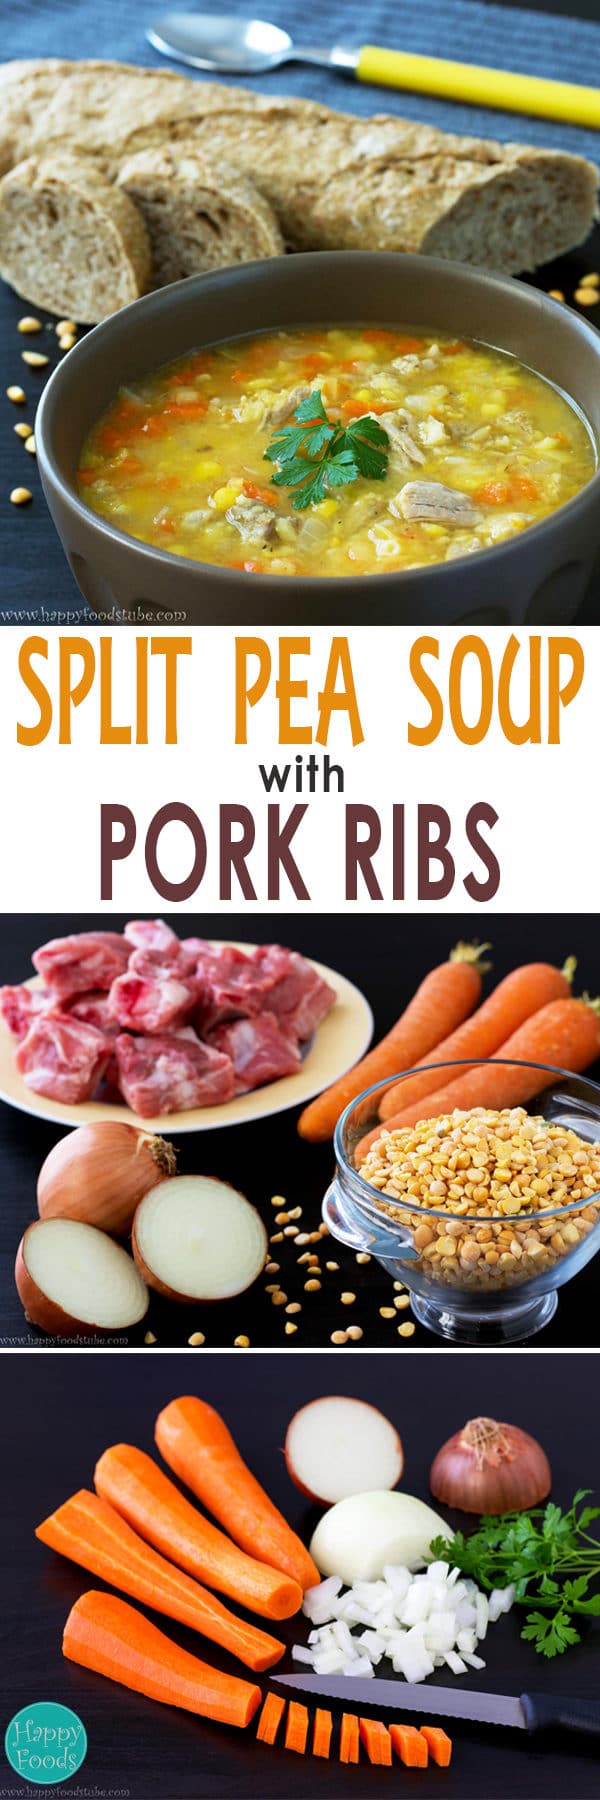 Split Pea Soup With Pork Ribs - Hearty, thick and most of all delicious soup recipe! Serve with a slice of buttered toast or any bread of your choice. If you like stronger flavours, use smoked ribs. Meaty soups. | happyfoodstube.com